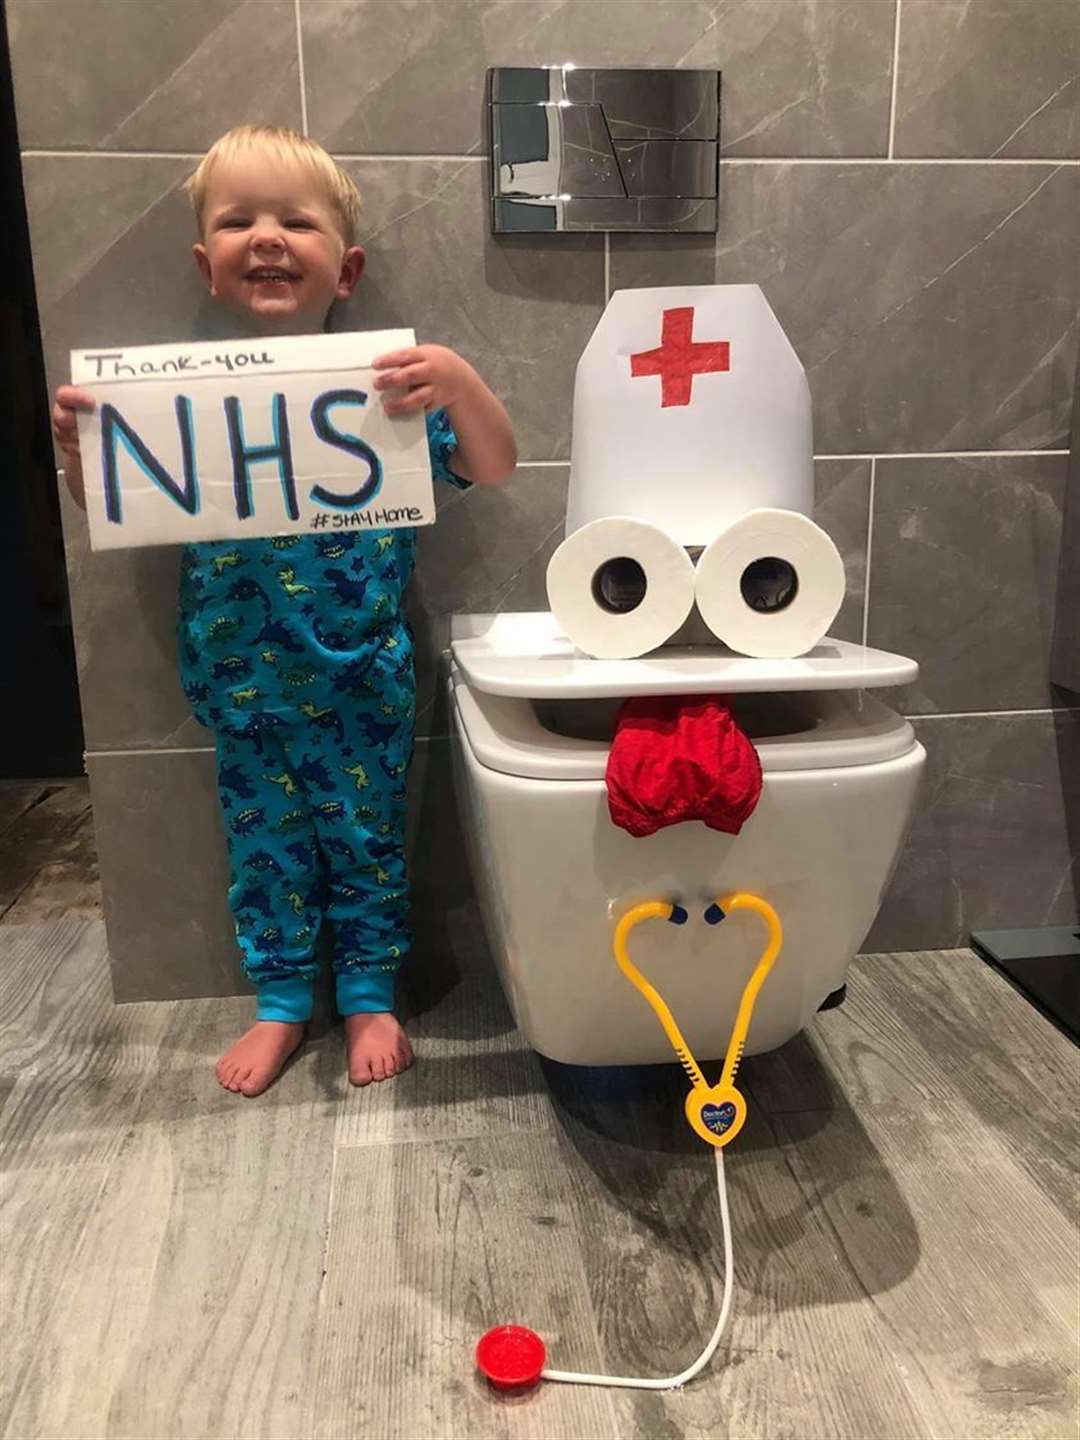 Hugo, 3, with his NHS toilet monster (32681131)